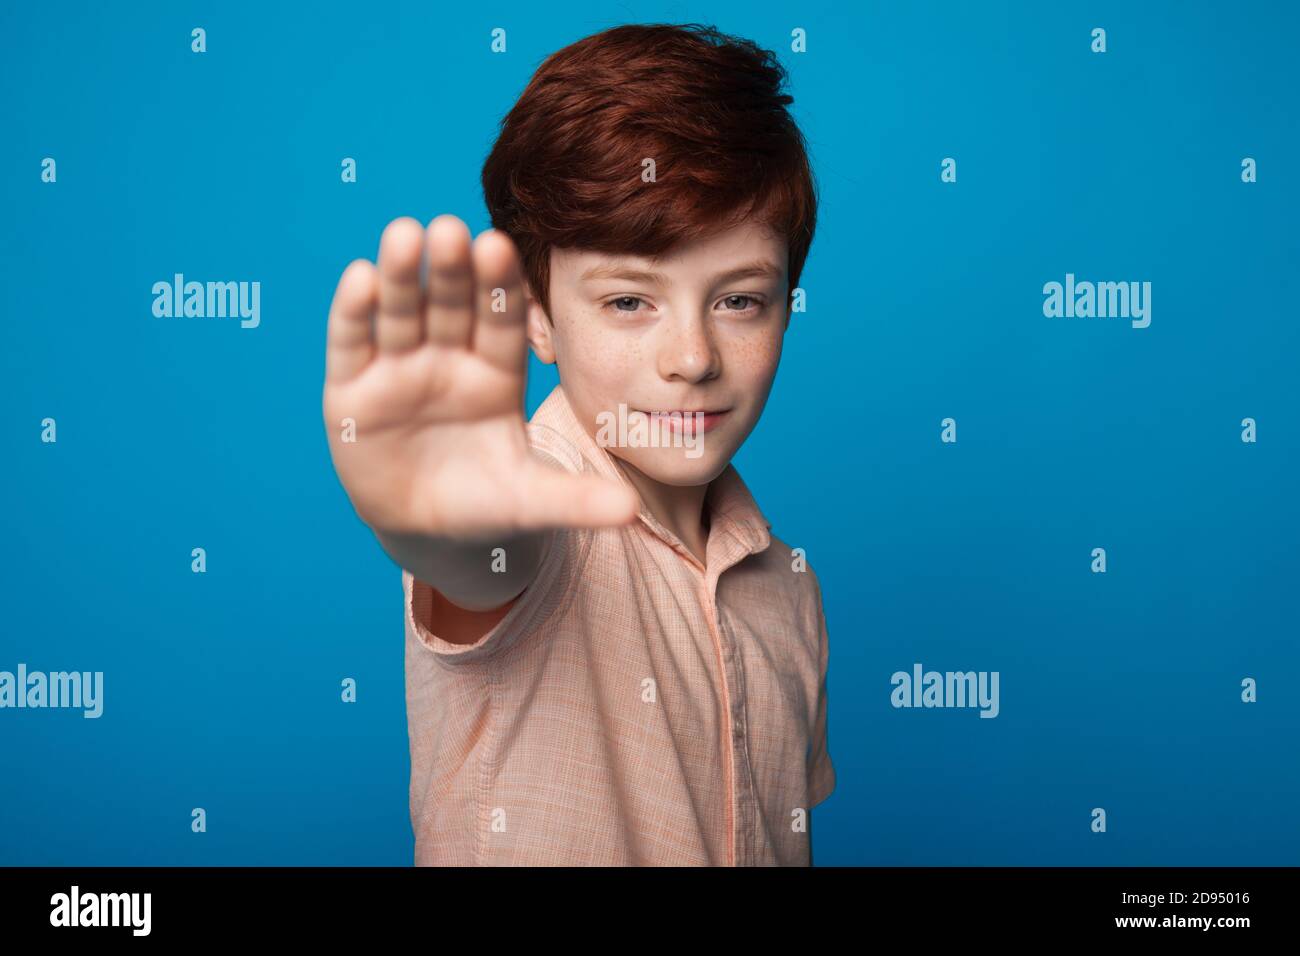 Close up photo of a smiling boy with red hair and freckles gesturing stop sign on a blue wall looking at camera Stock Photo